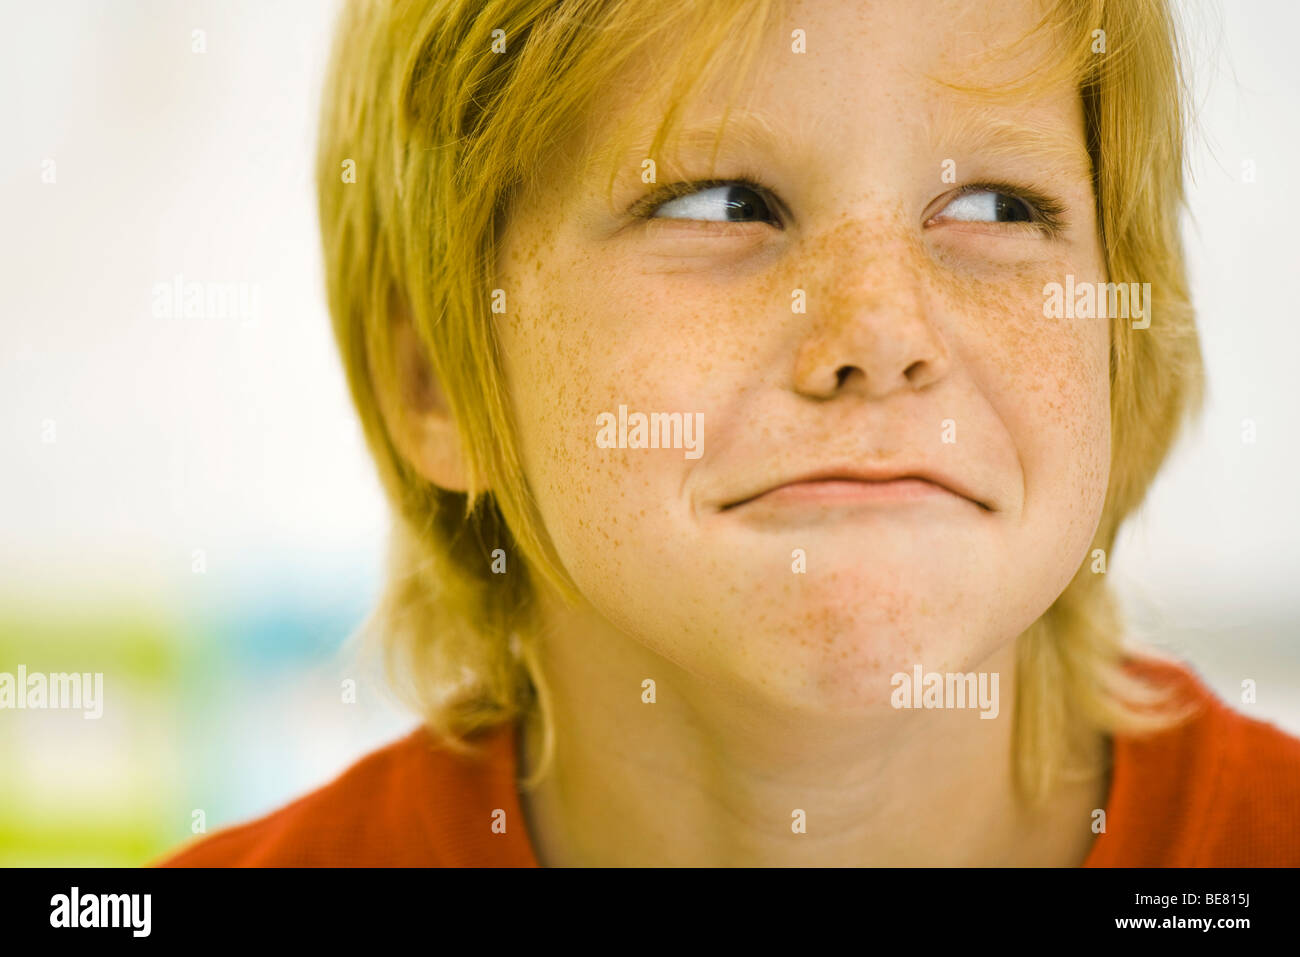 Little boy frowning Stock Photo